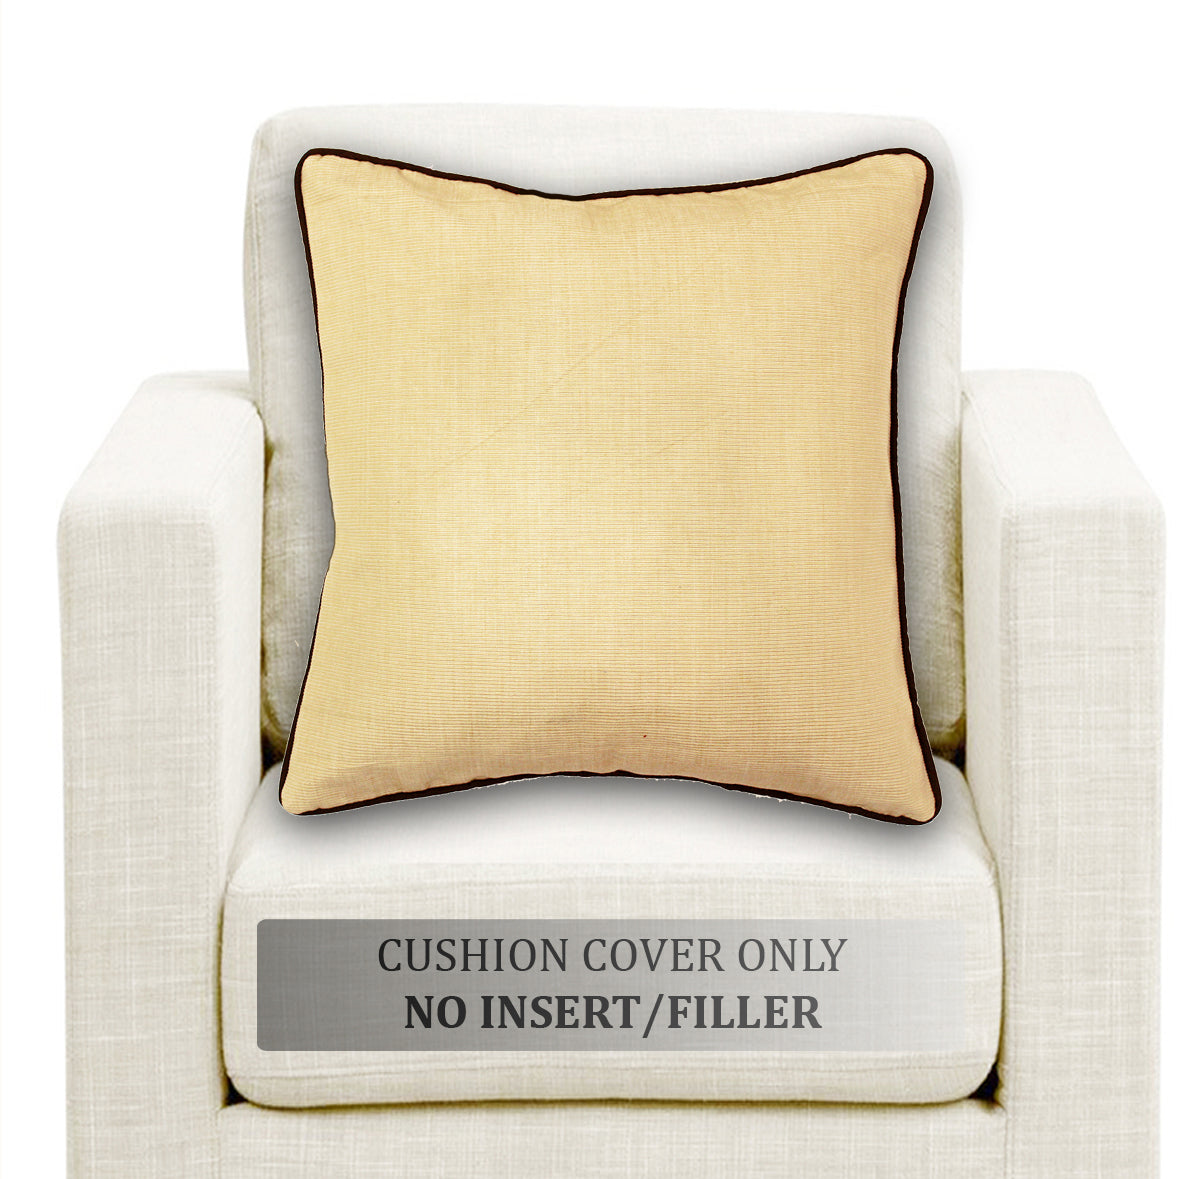 Soft Woven Corded Stripe Cotton Cushion Cover Set in Beige online (1Pc)